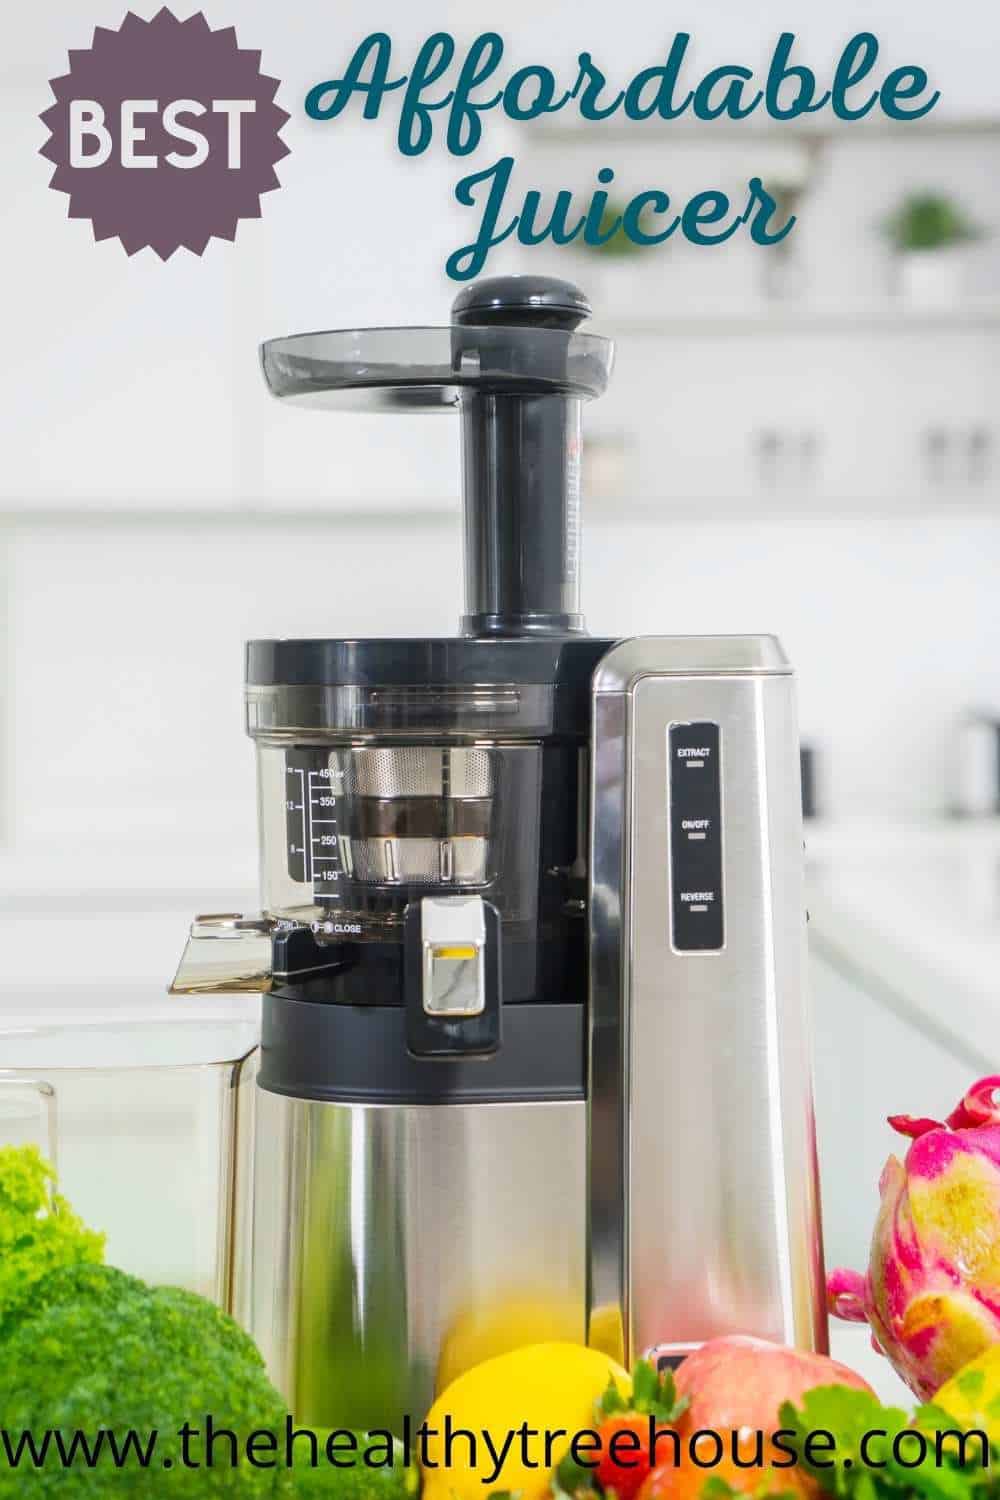 The Best Affordable Juicer in currentyear The Healthy Treehouse